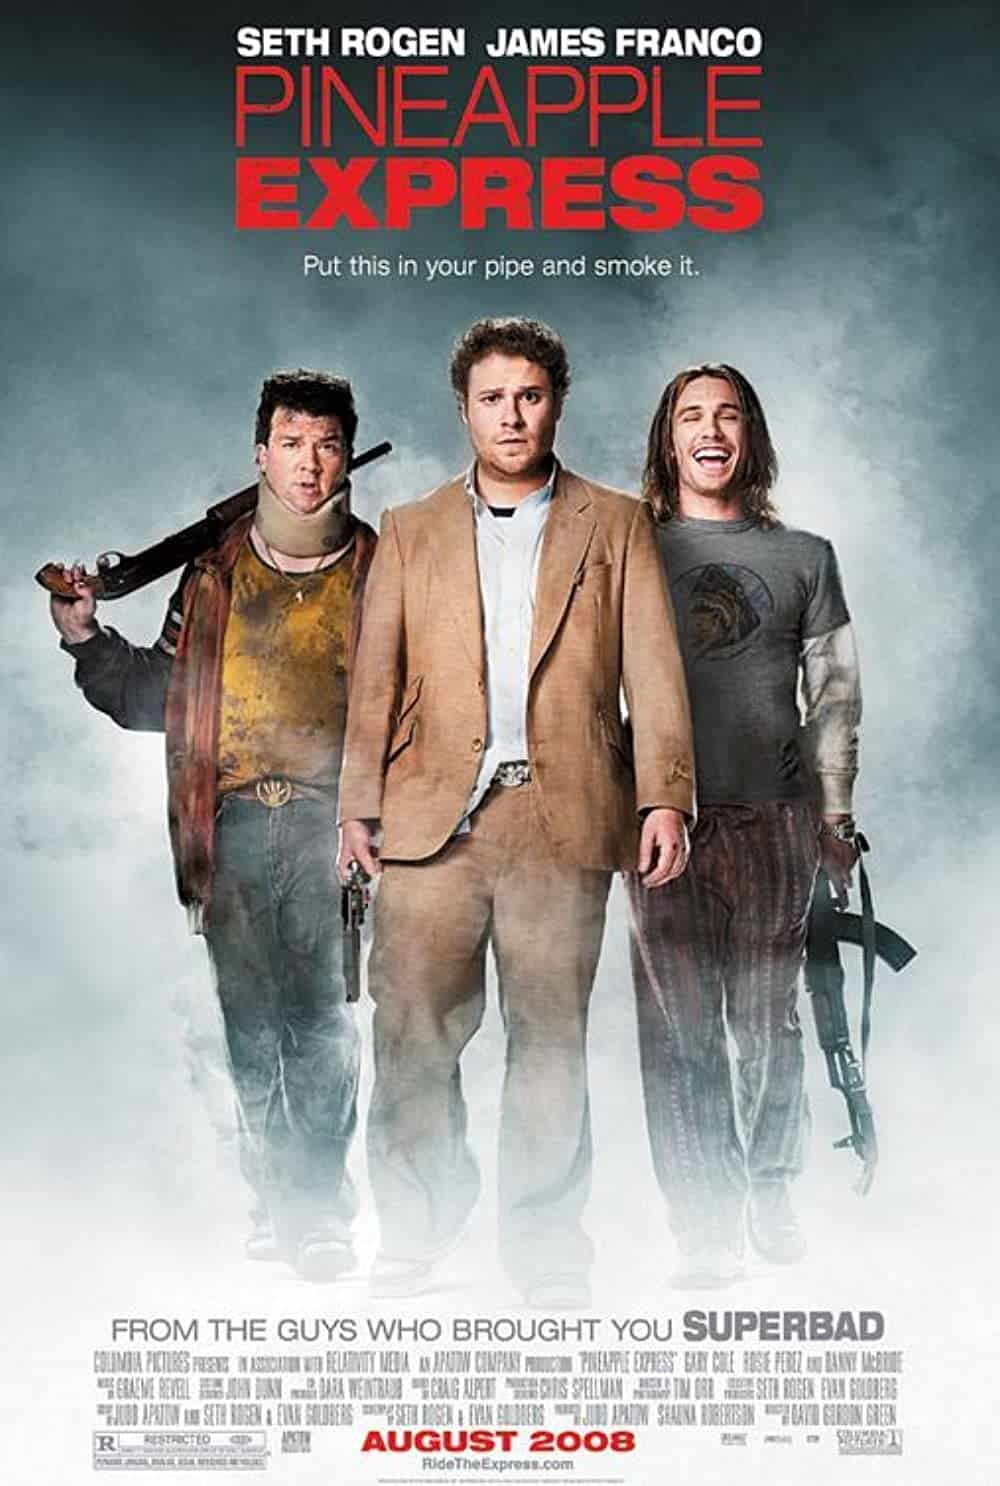 Pineapple Express (2008) Best Movies like Superbad